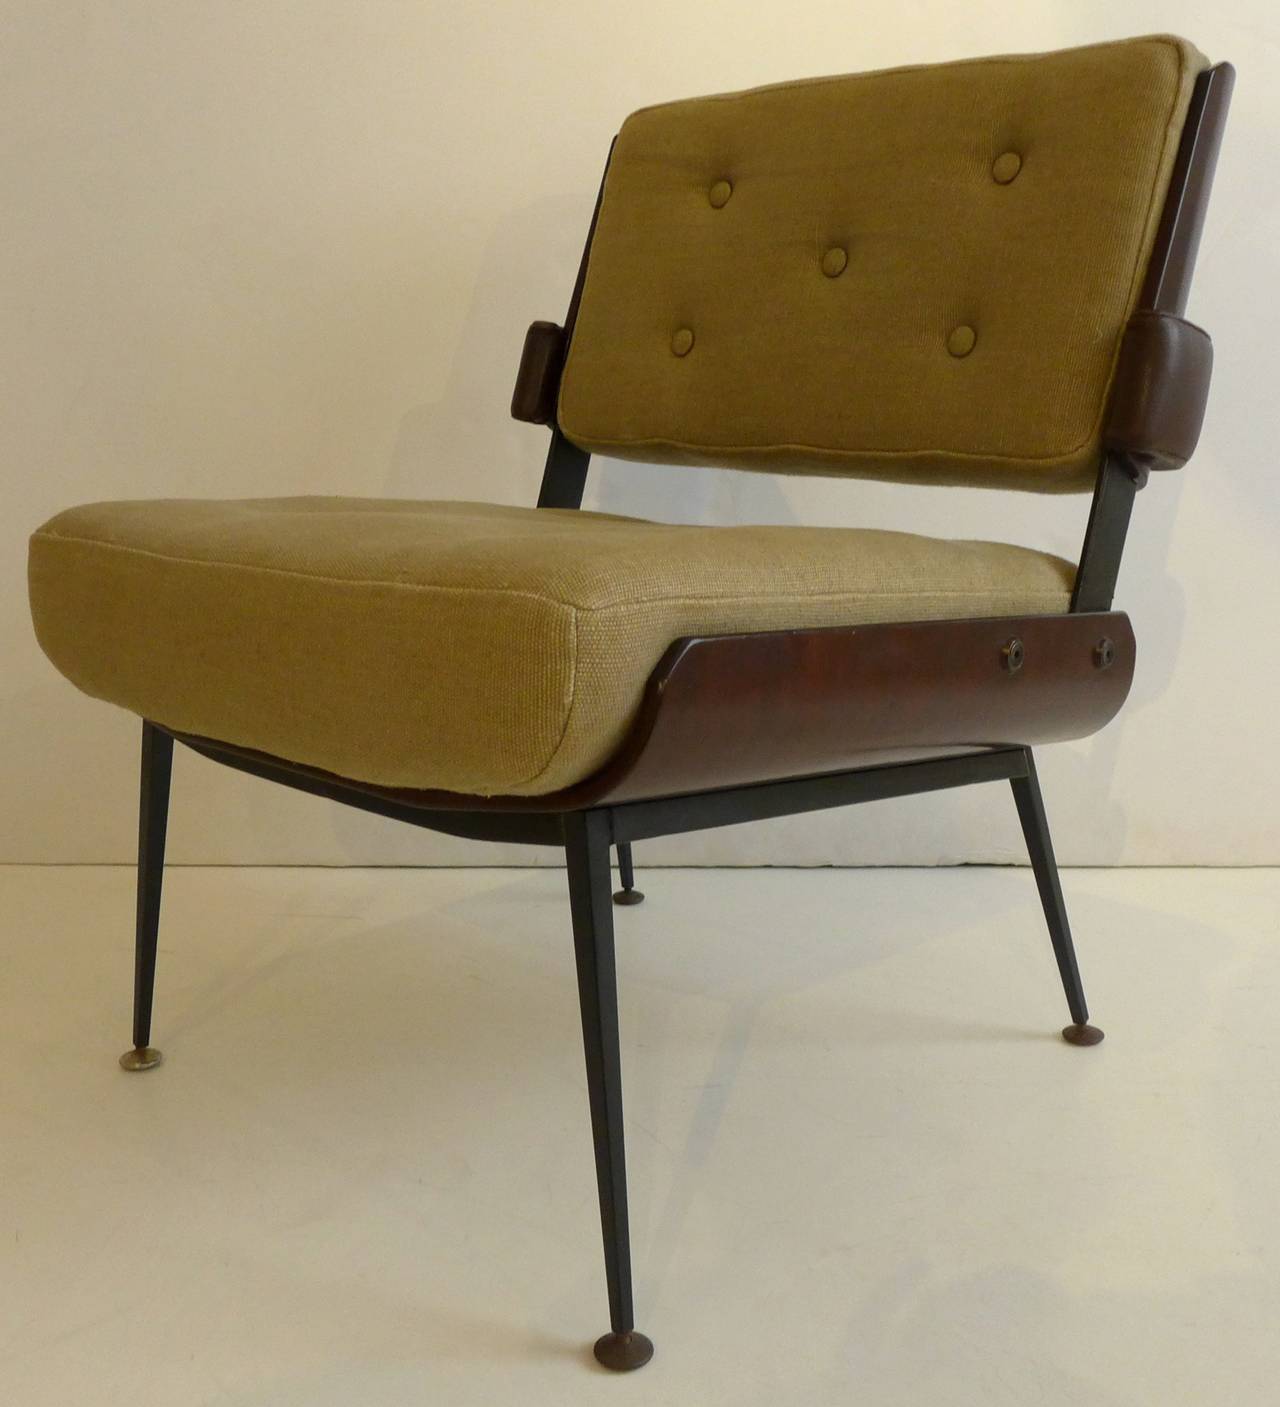 Sleek and stylish pair of lounge chairs with attenuated wraparound arms by French designer Alain Richard, circa 1960. The seat and back shells are laminated mahogany; the base is enameled steel. The arms are wrapped in leather, as is the steel